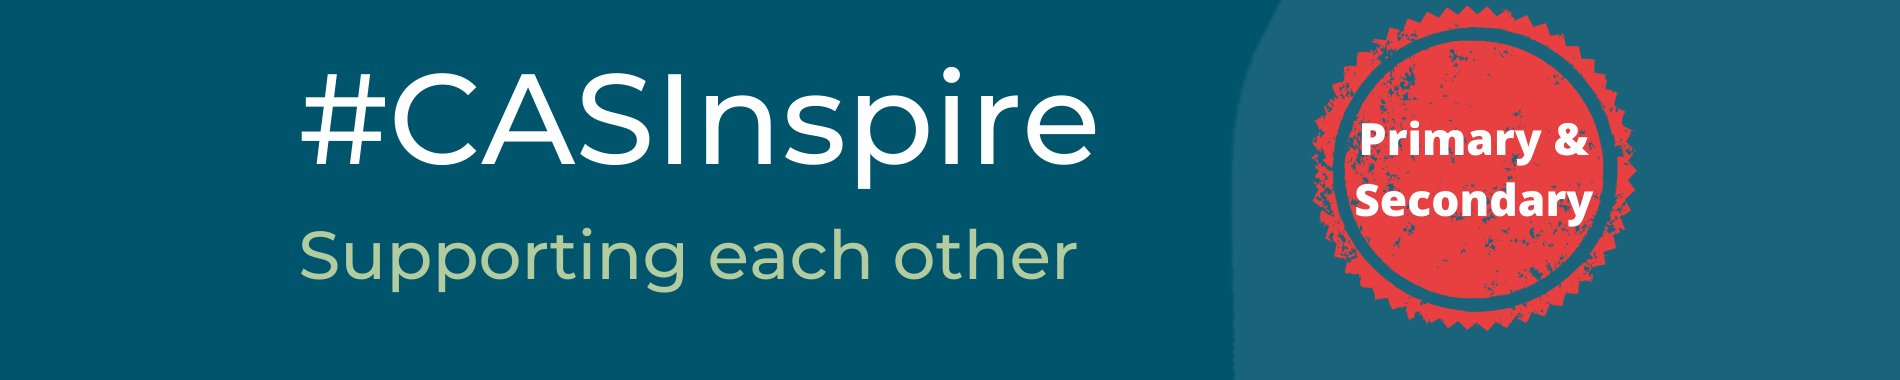 #Casinspire Supporting Each Other (1)